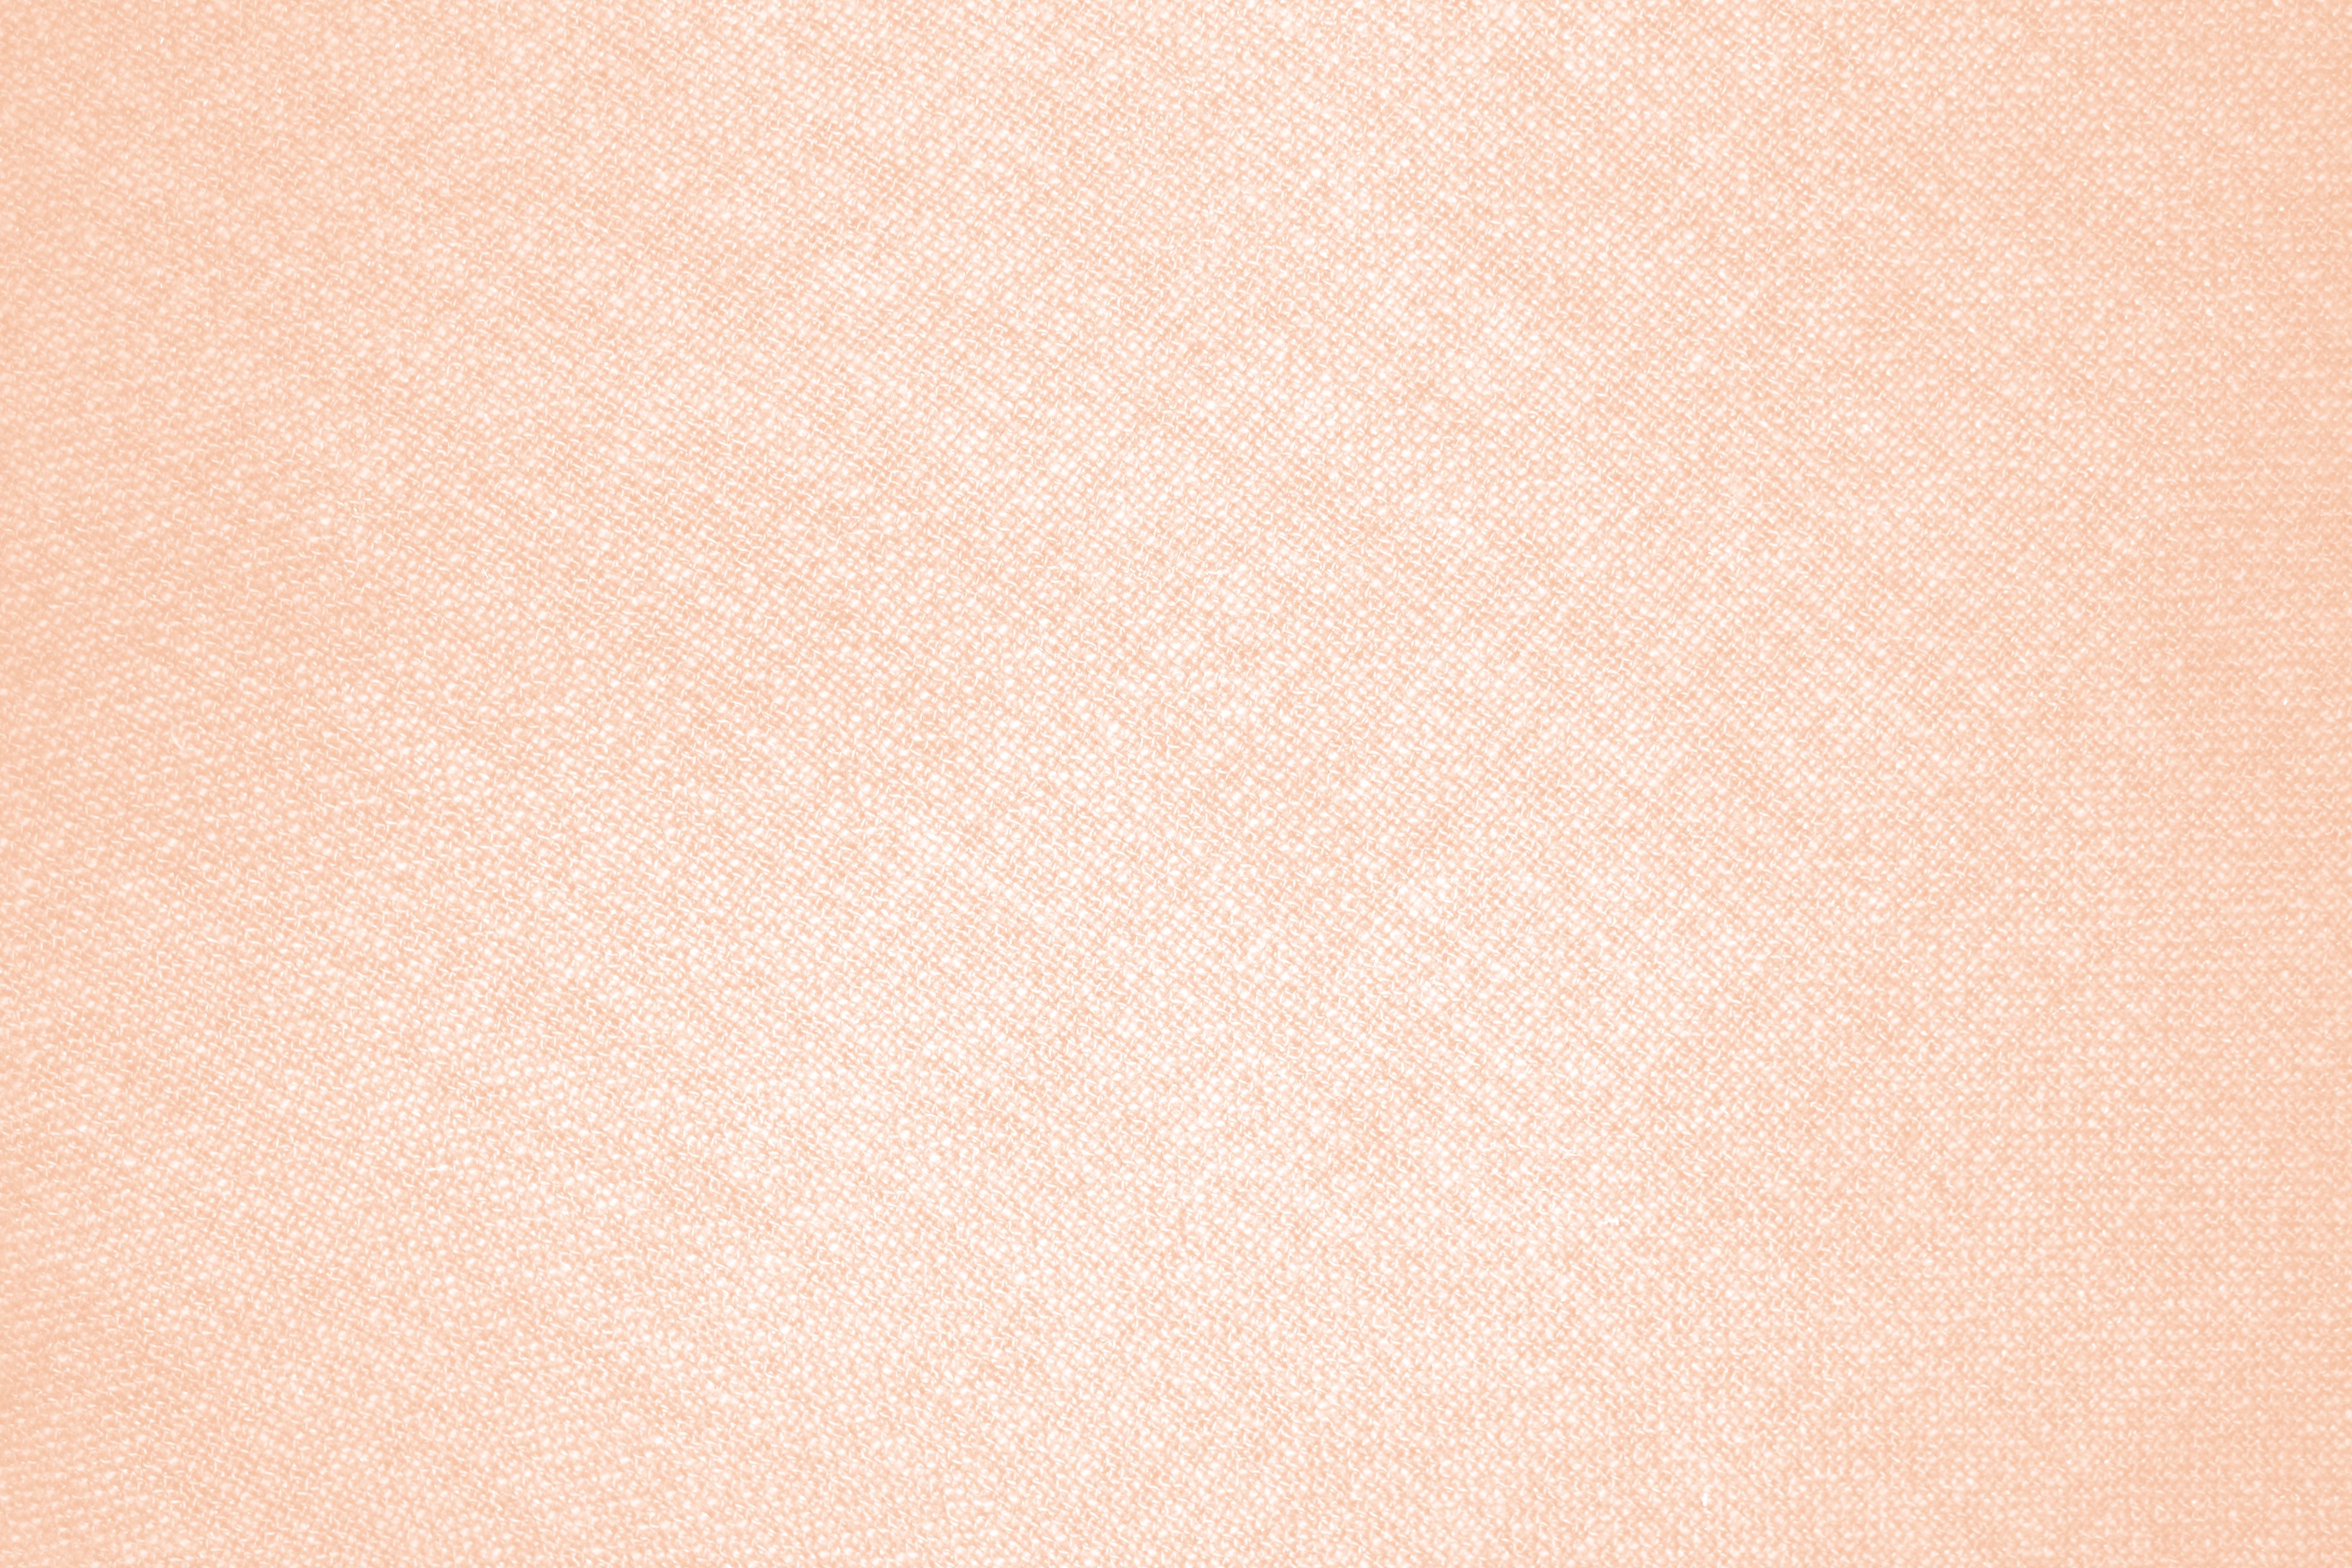 Peach Colored Fabric Texture Picture Free Photograph Photos Public